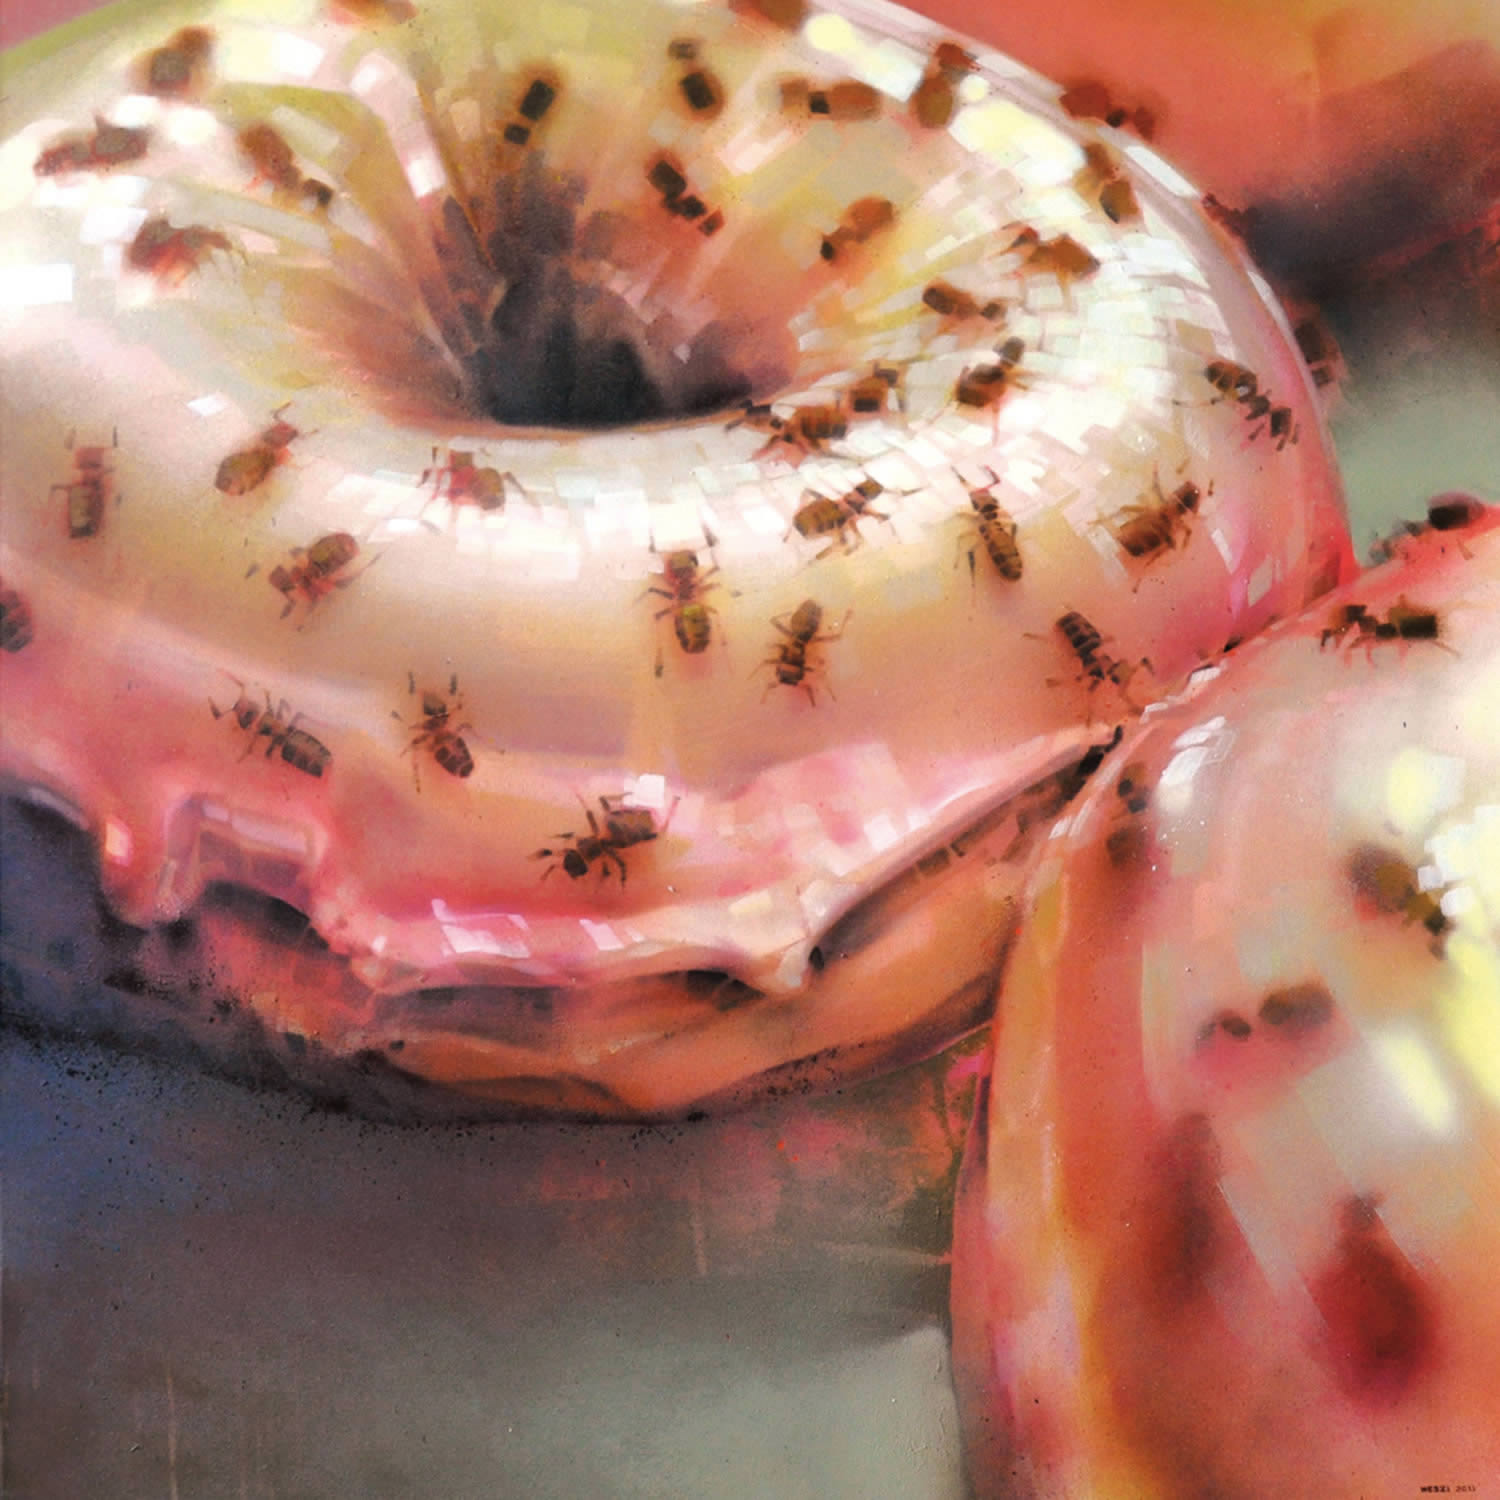 closeup of donuts with ants, graffiti